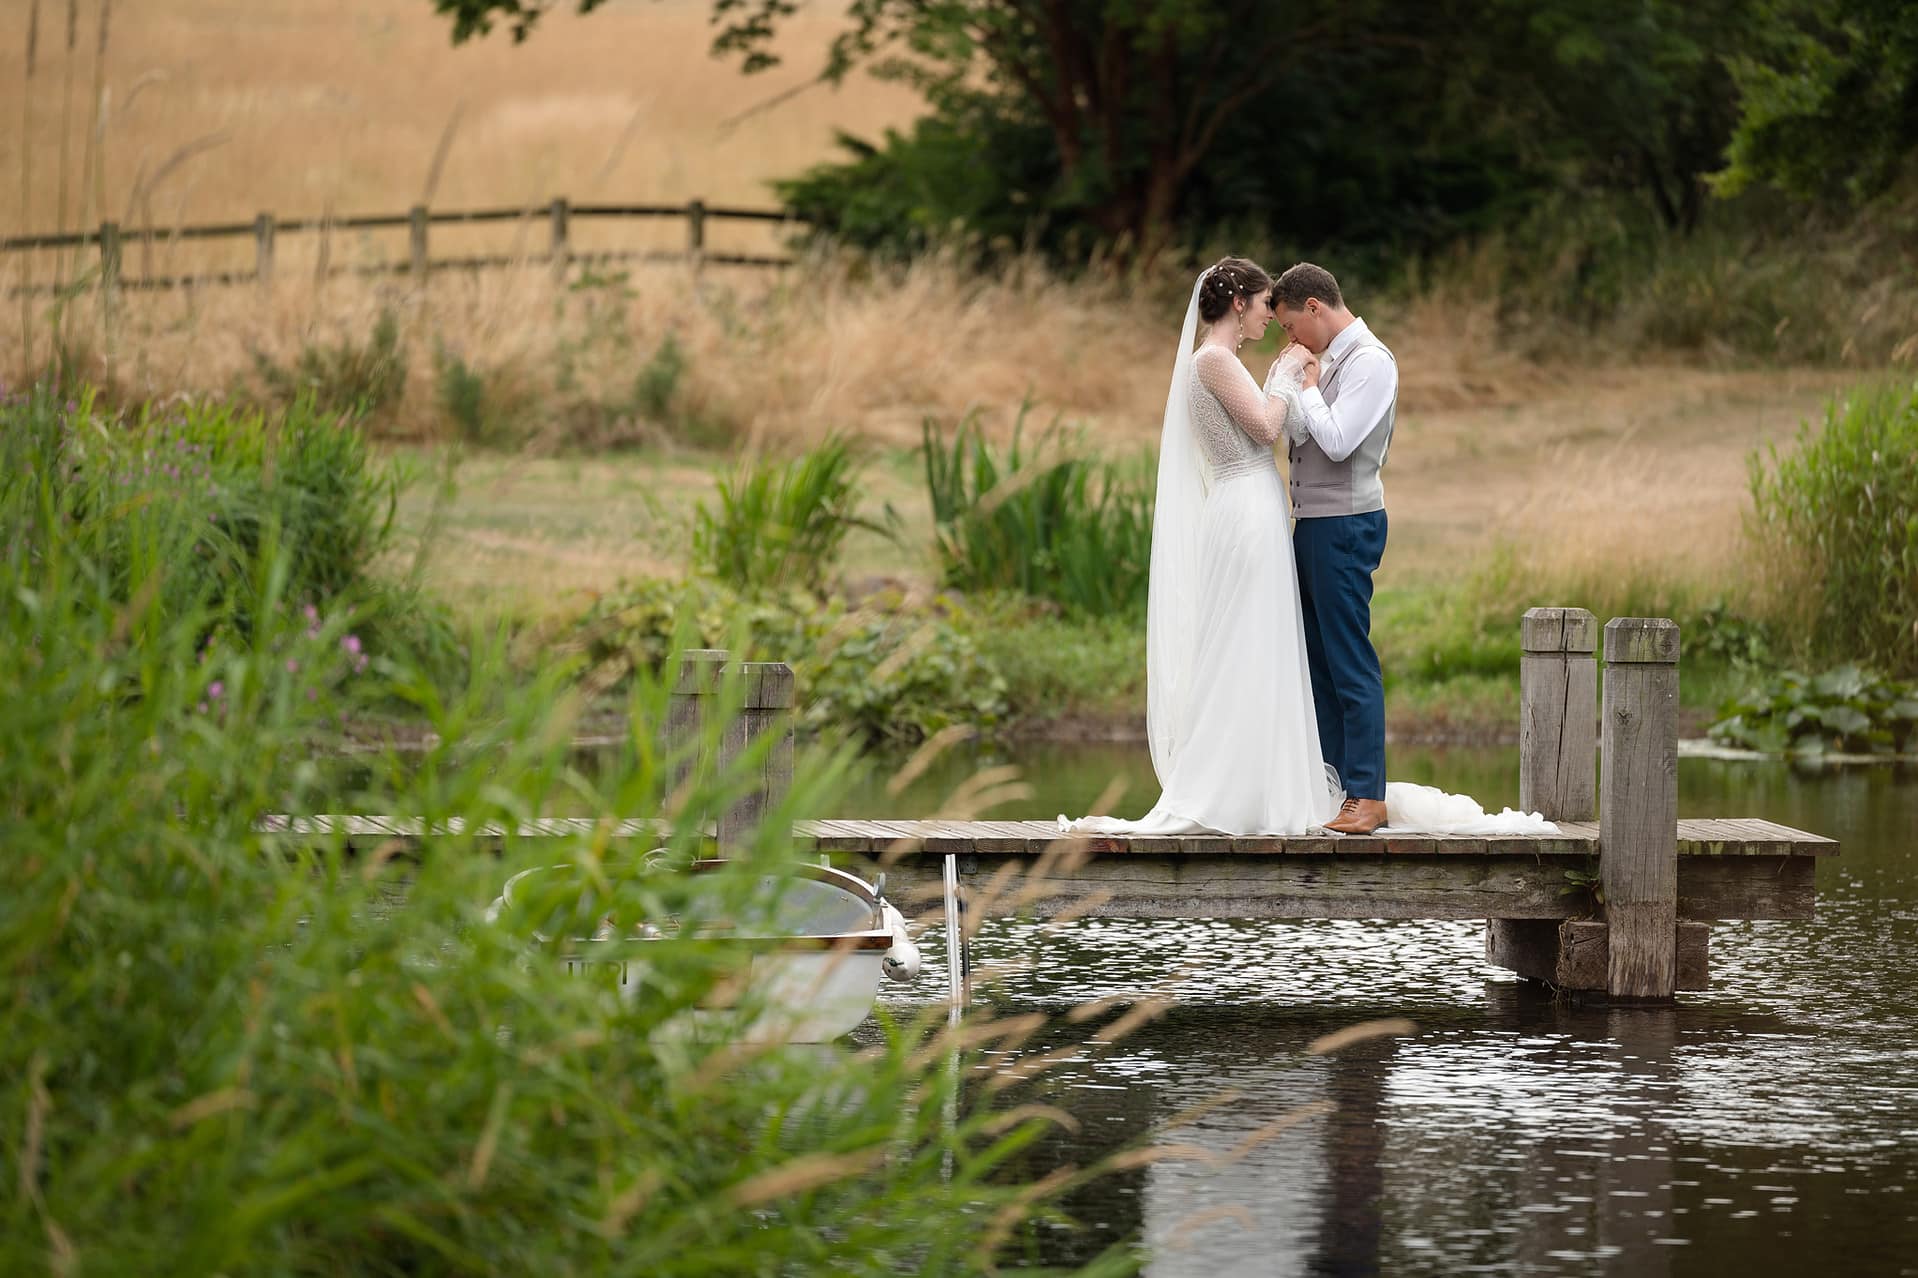 Groom kissing the bride's hands as they stand on a little wooden jetty over a lake at Courteenhall